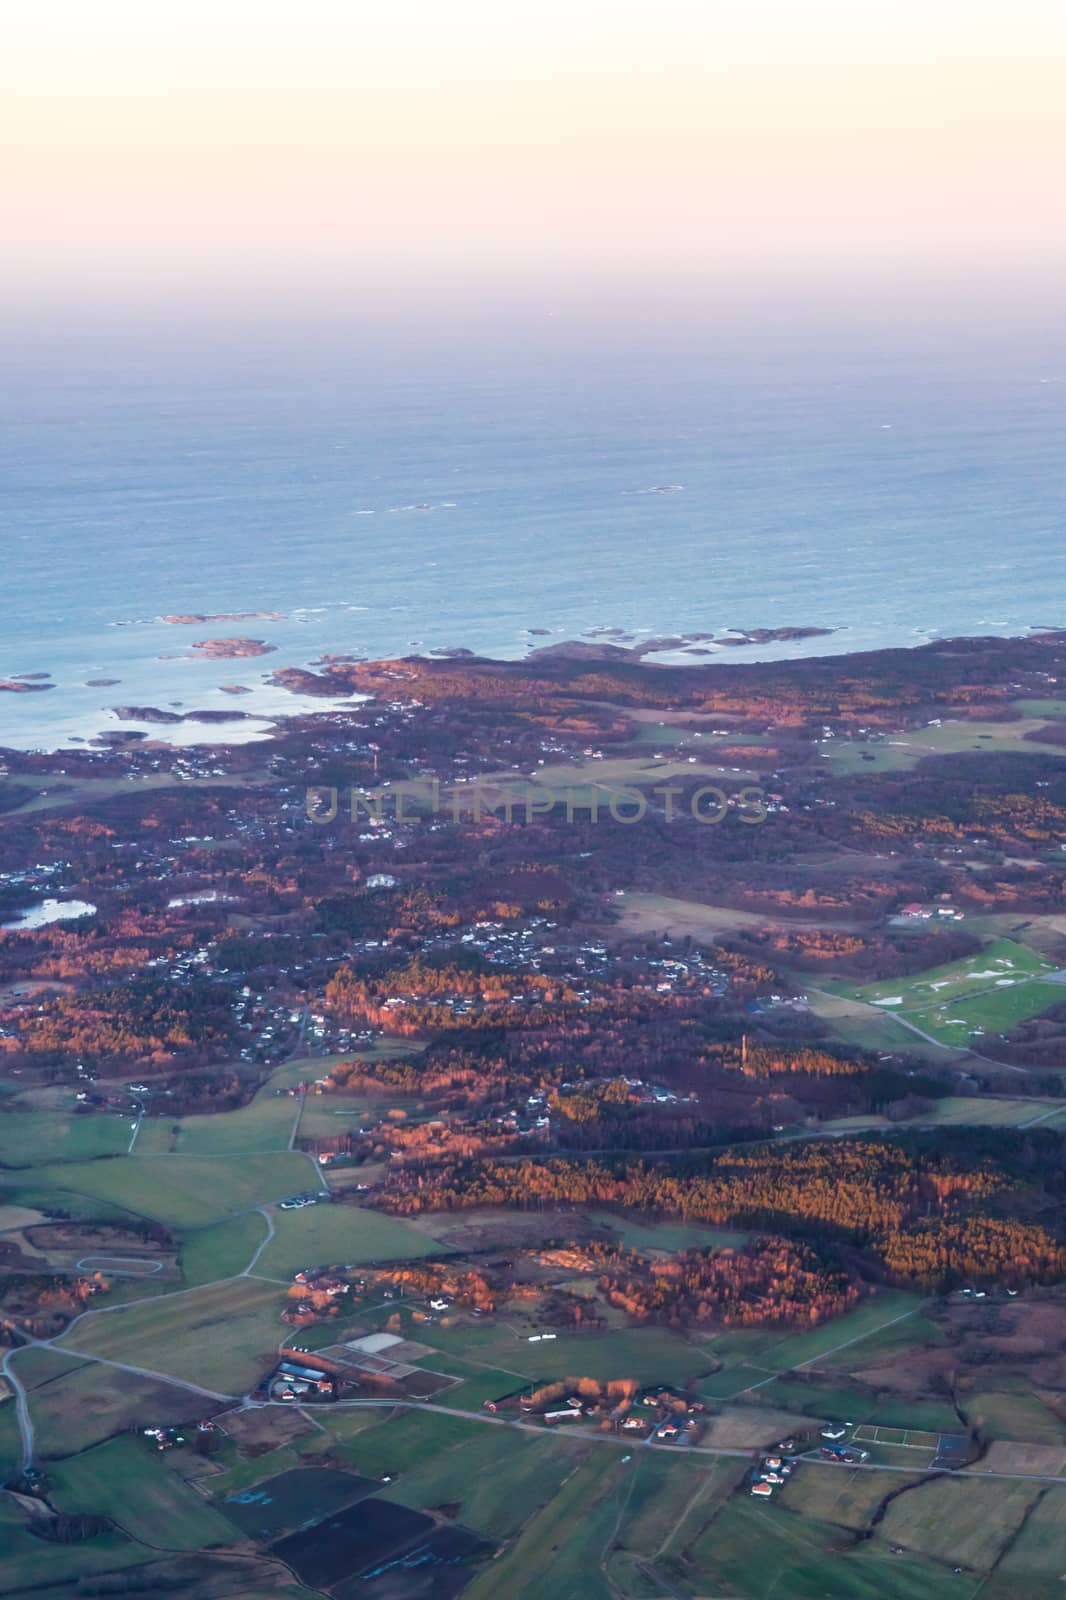 View of the coast of Sweden Northern Sea, Aircraft view 2 by MXW_Stock